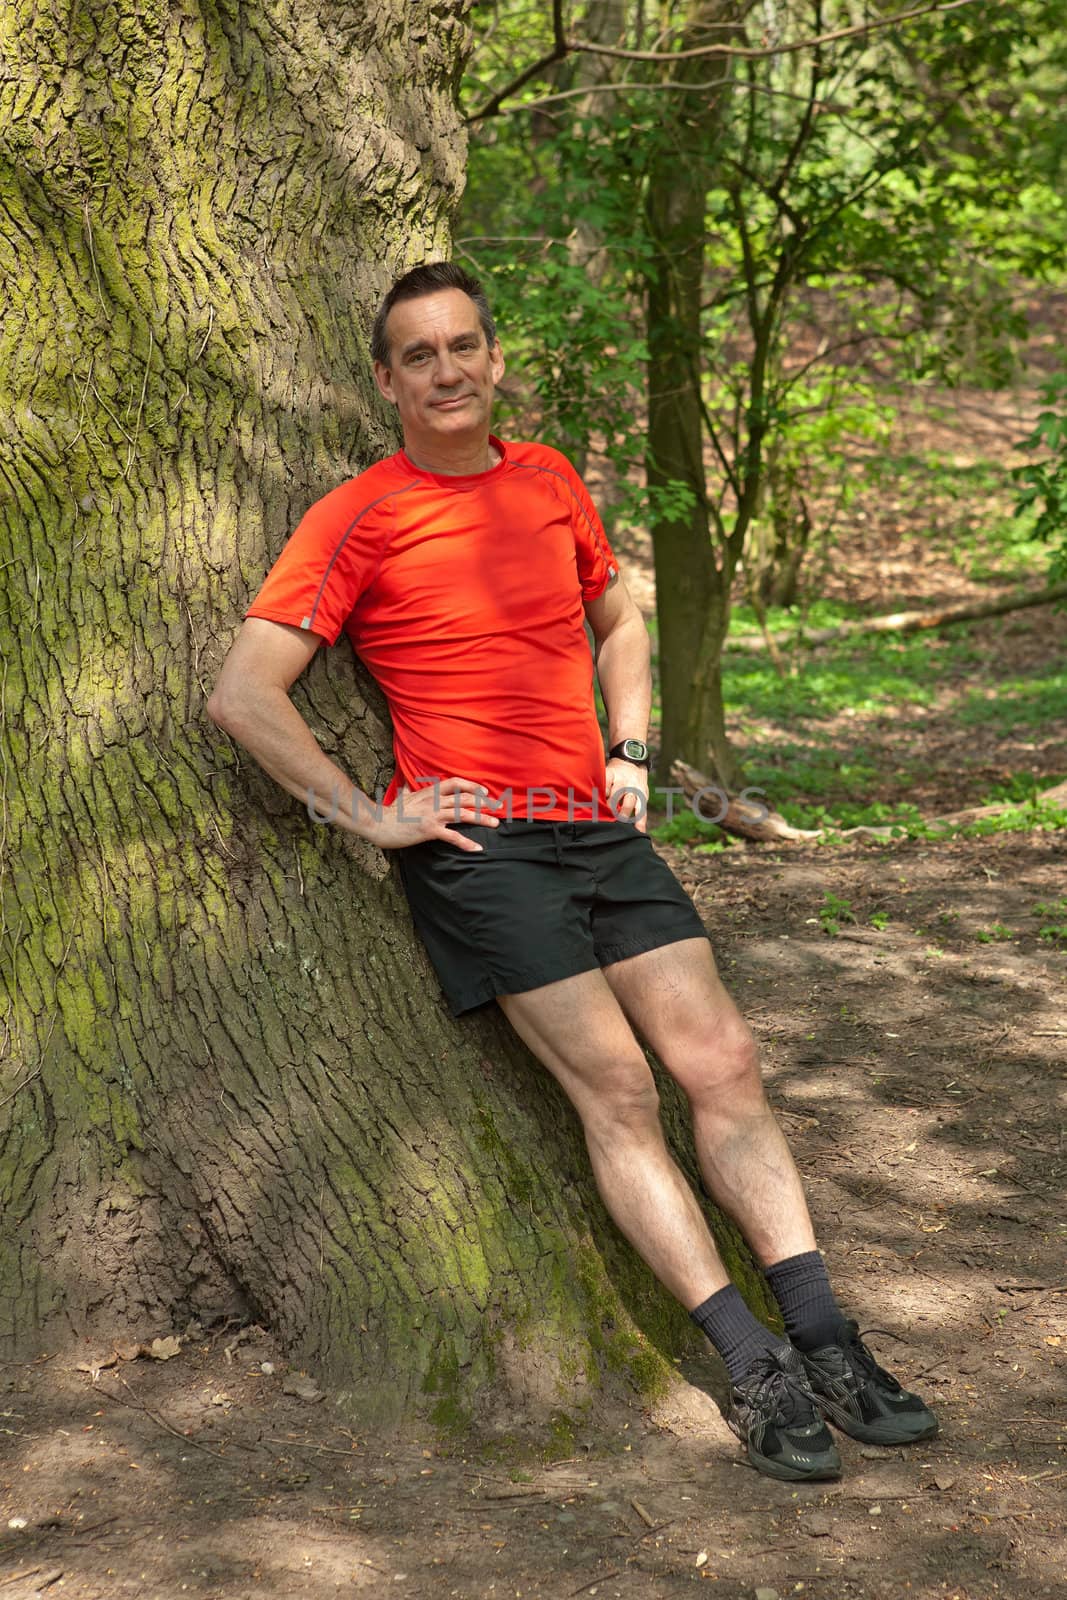 Smiling Middle Age Man Runner Relaxing against a Tree